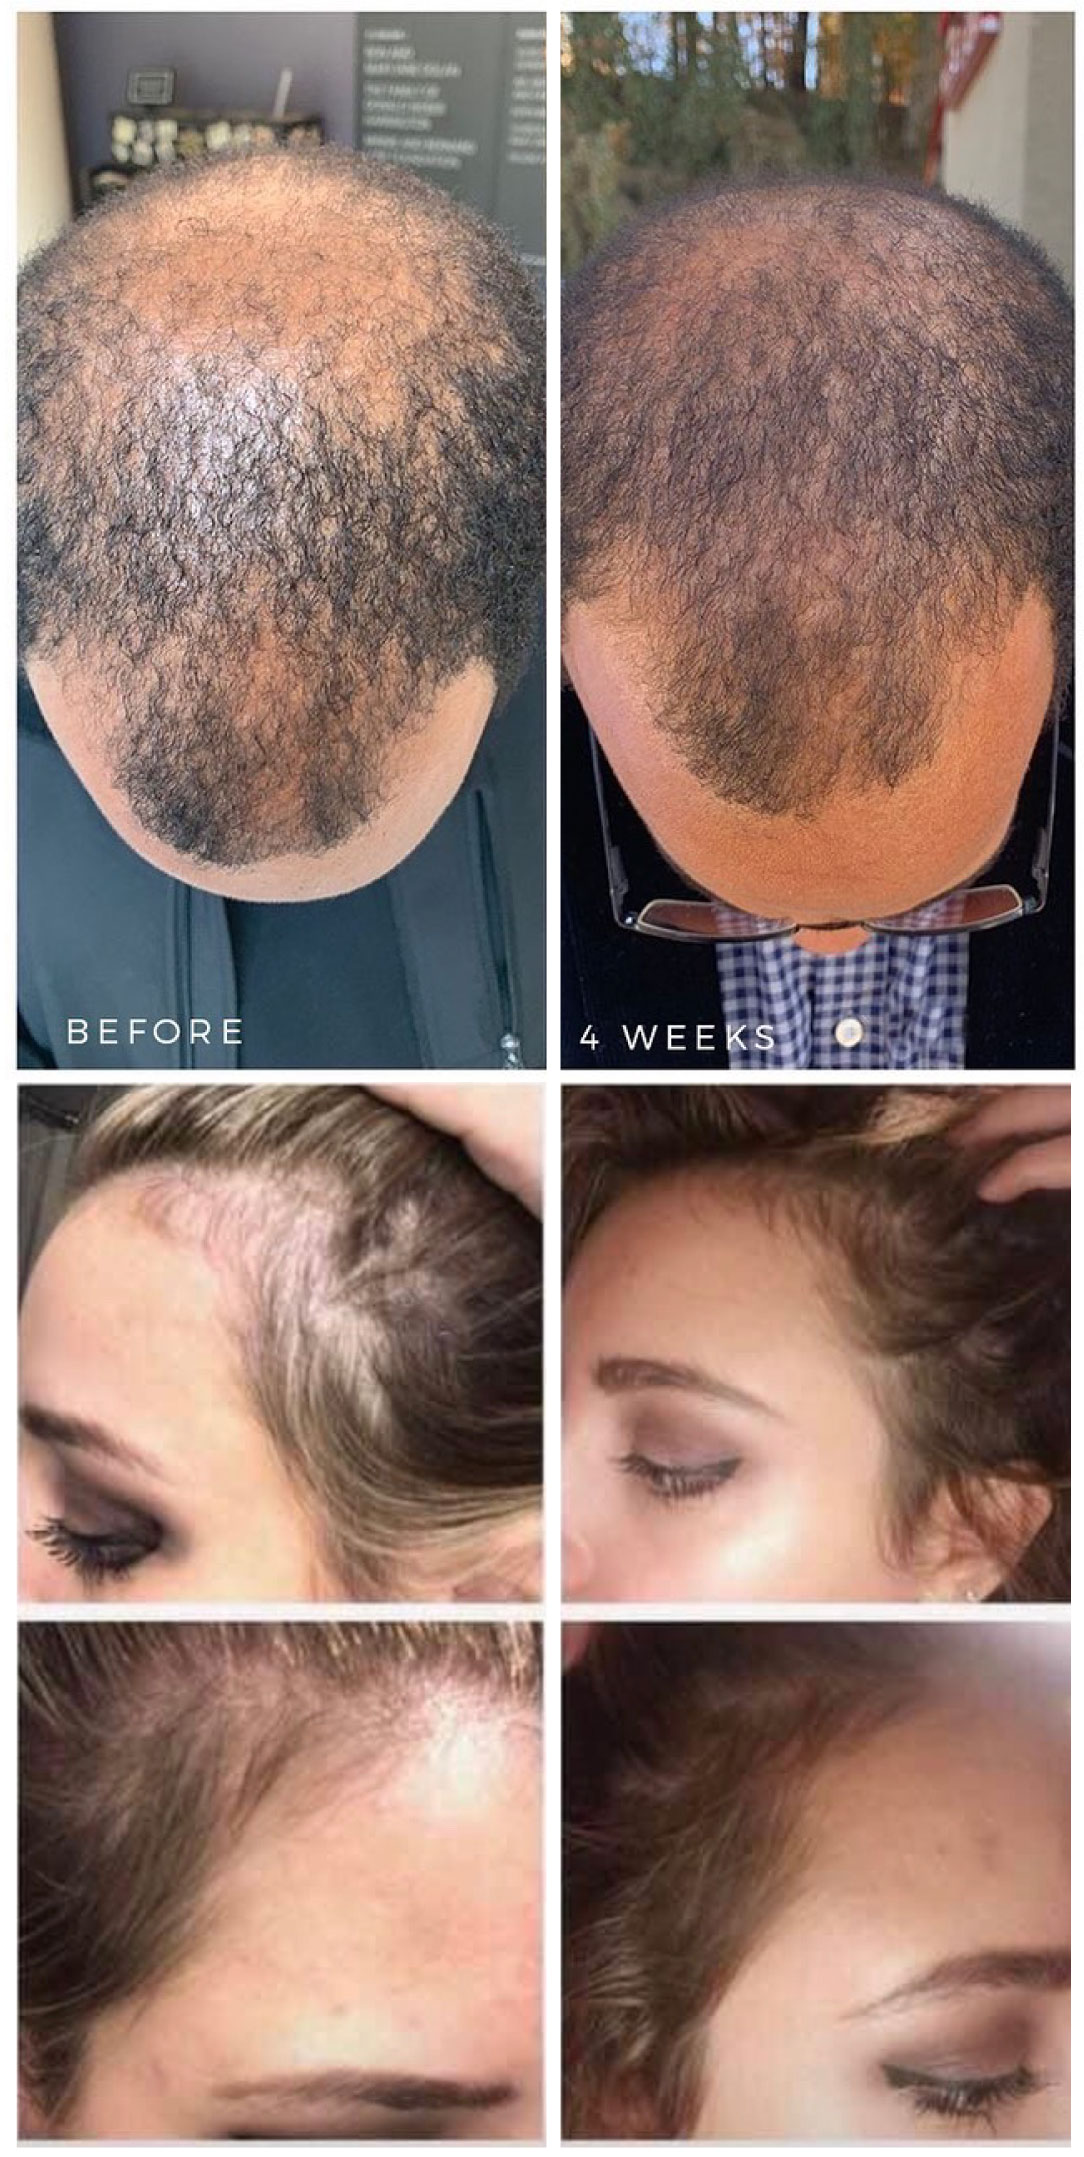 Zenagen before and after pictures